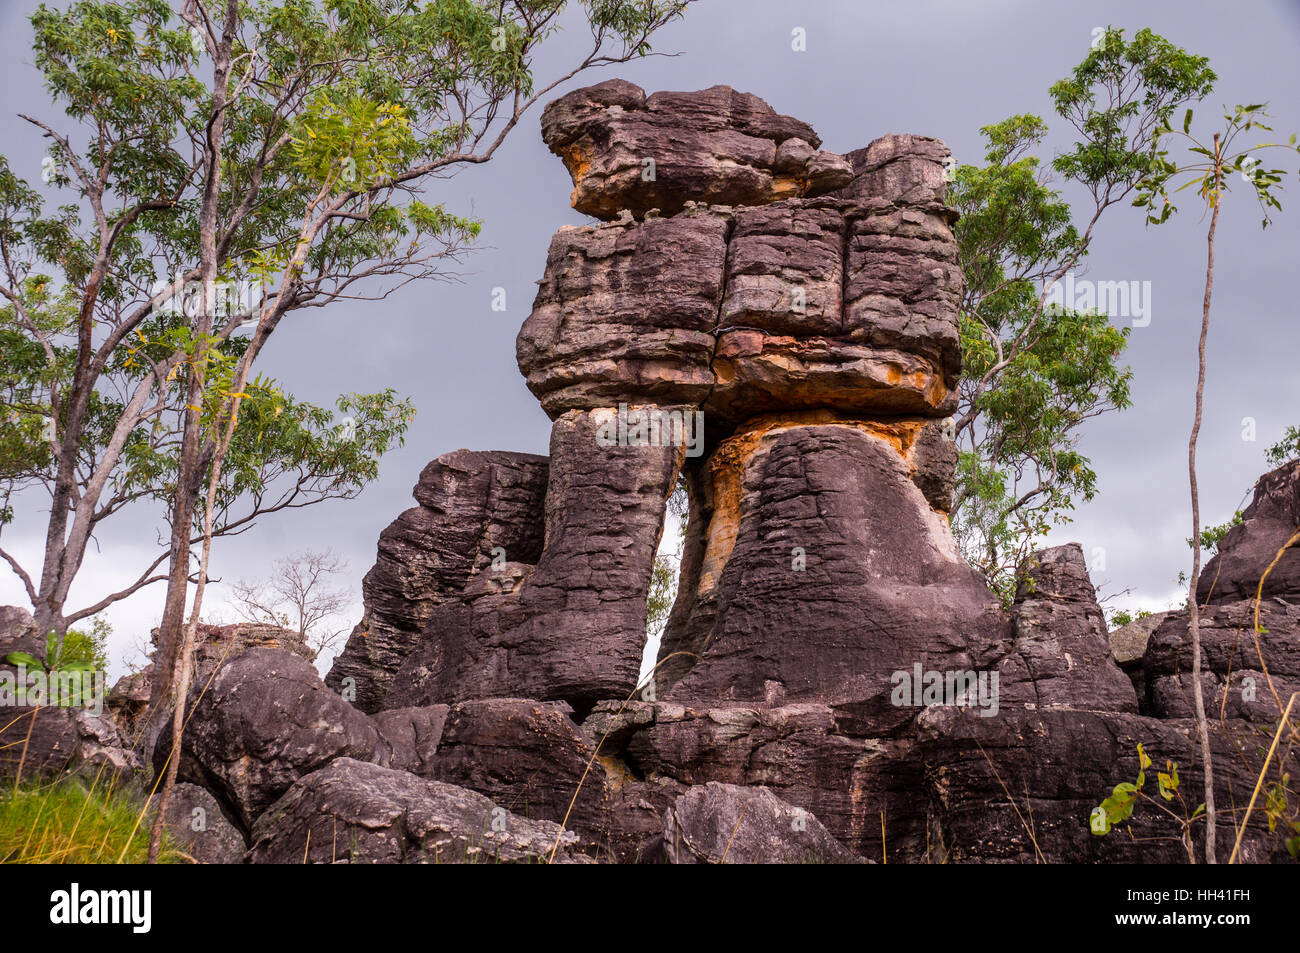 Lost City rock formations in Litchfield National Park Banque D'Images